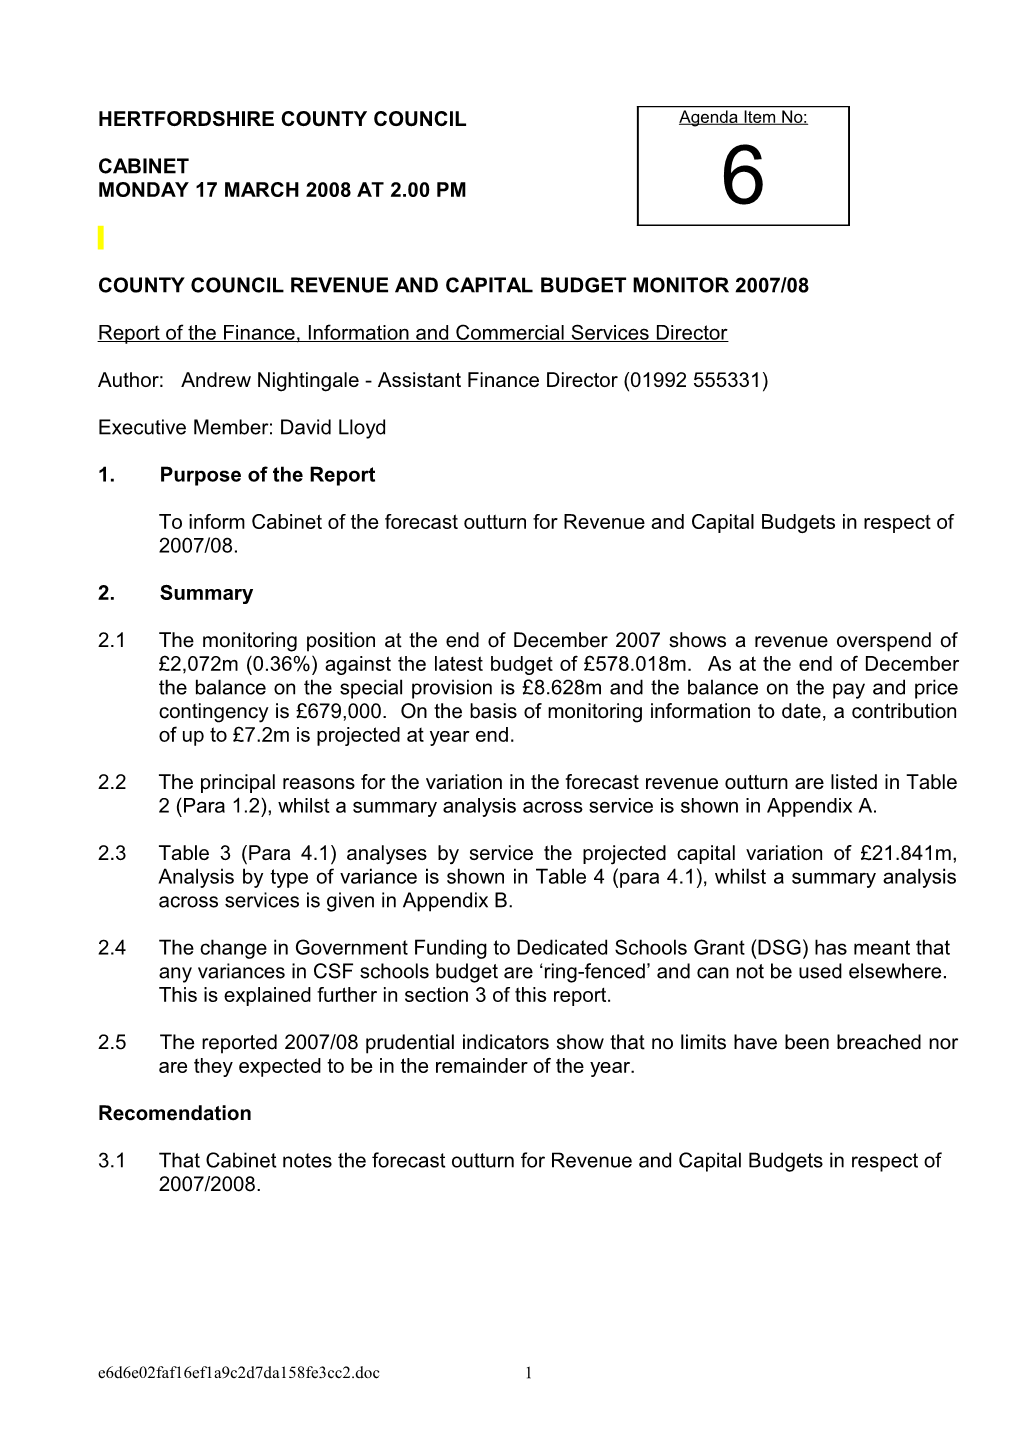 County Council Revenue and Capital Budget Monitor 2007/08